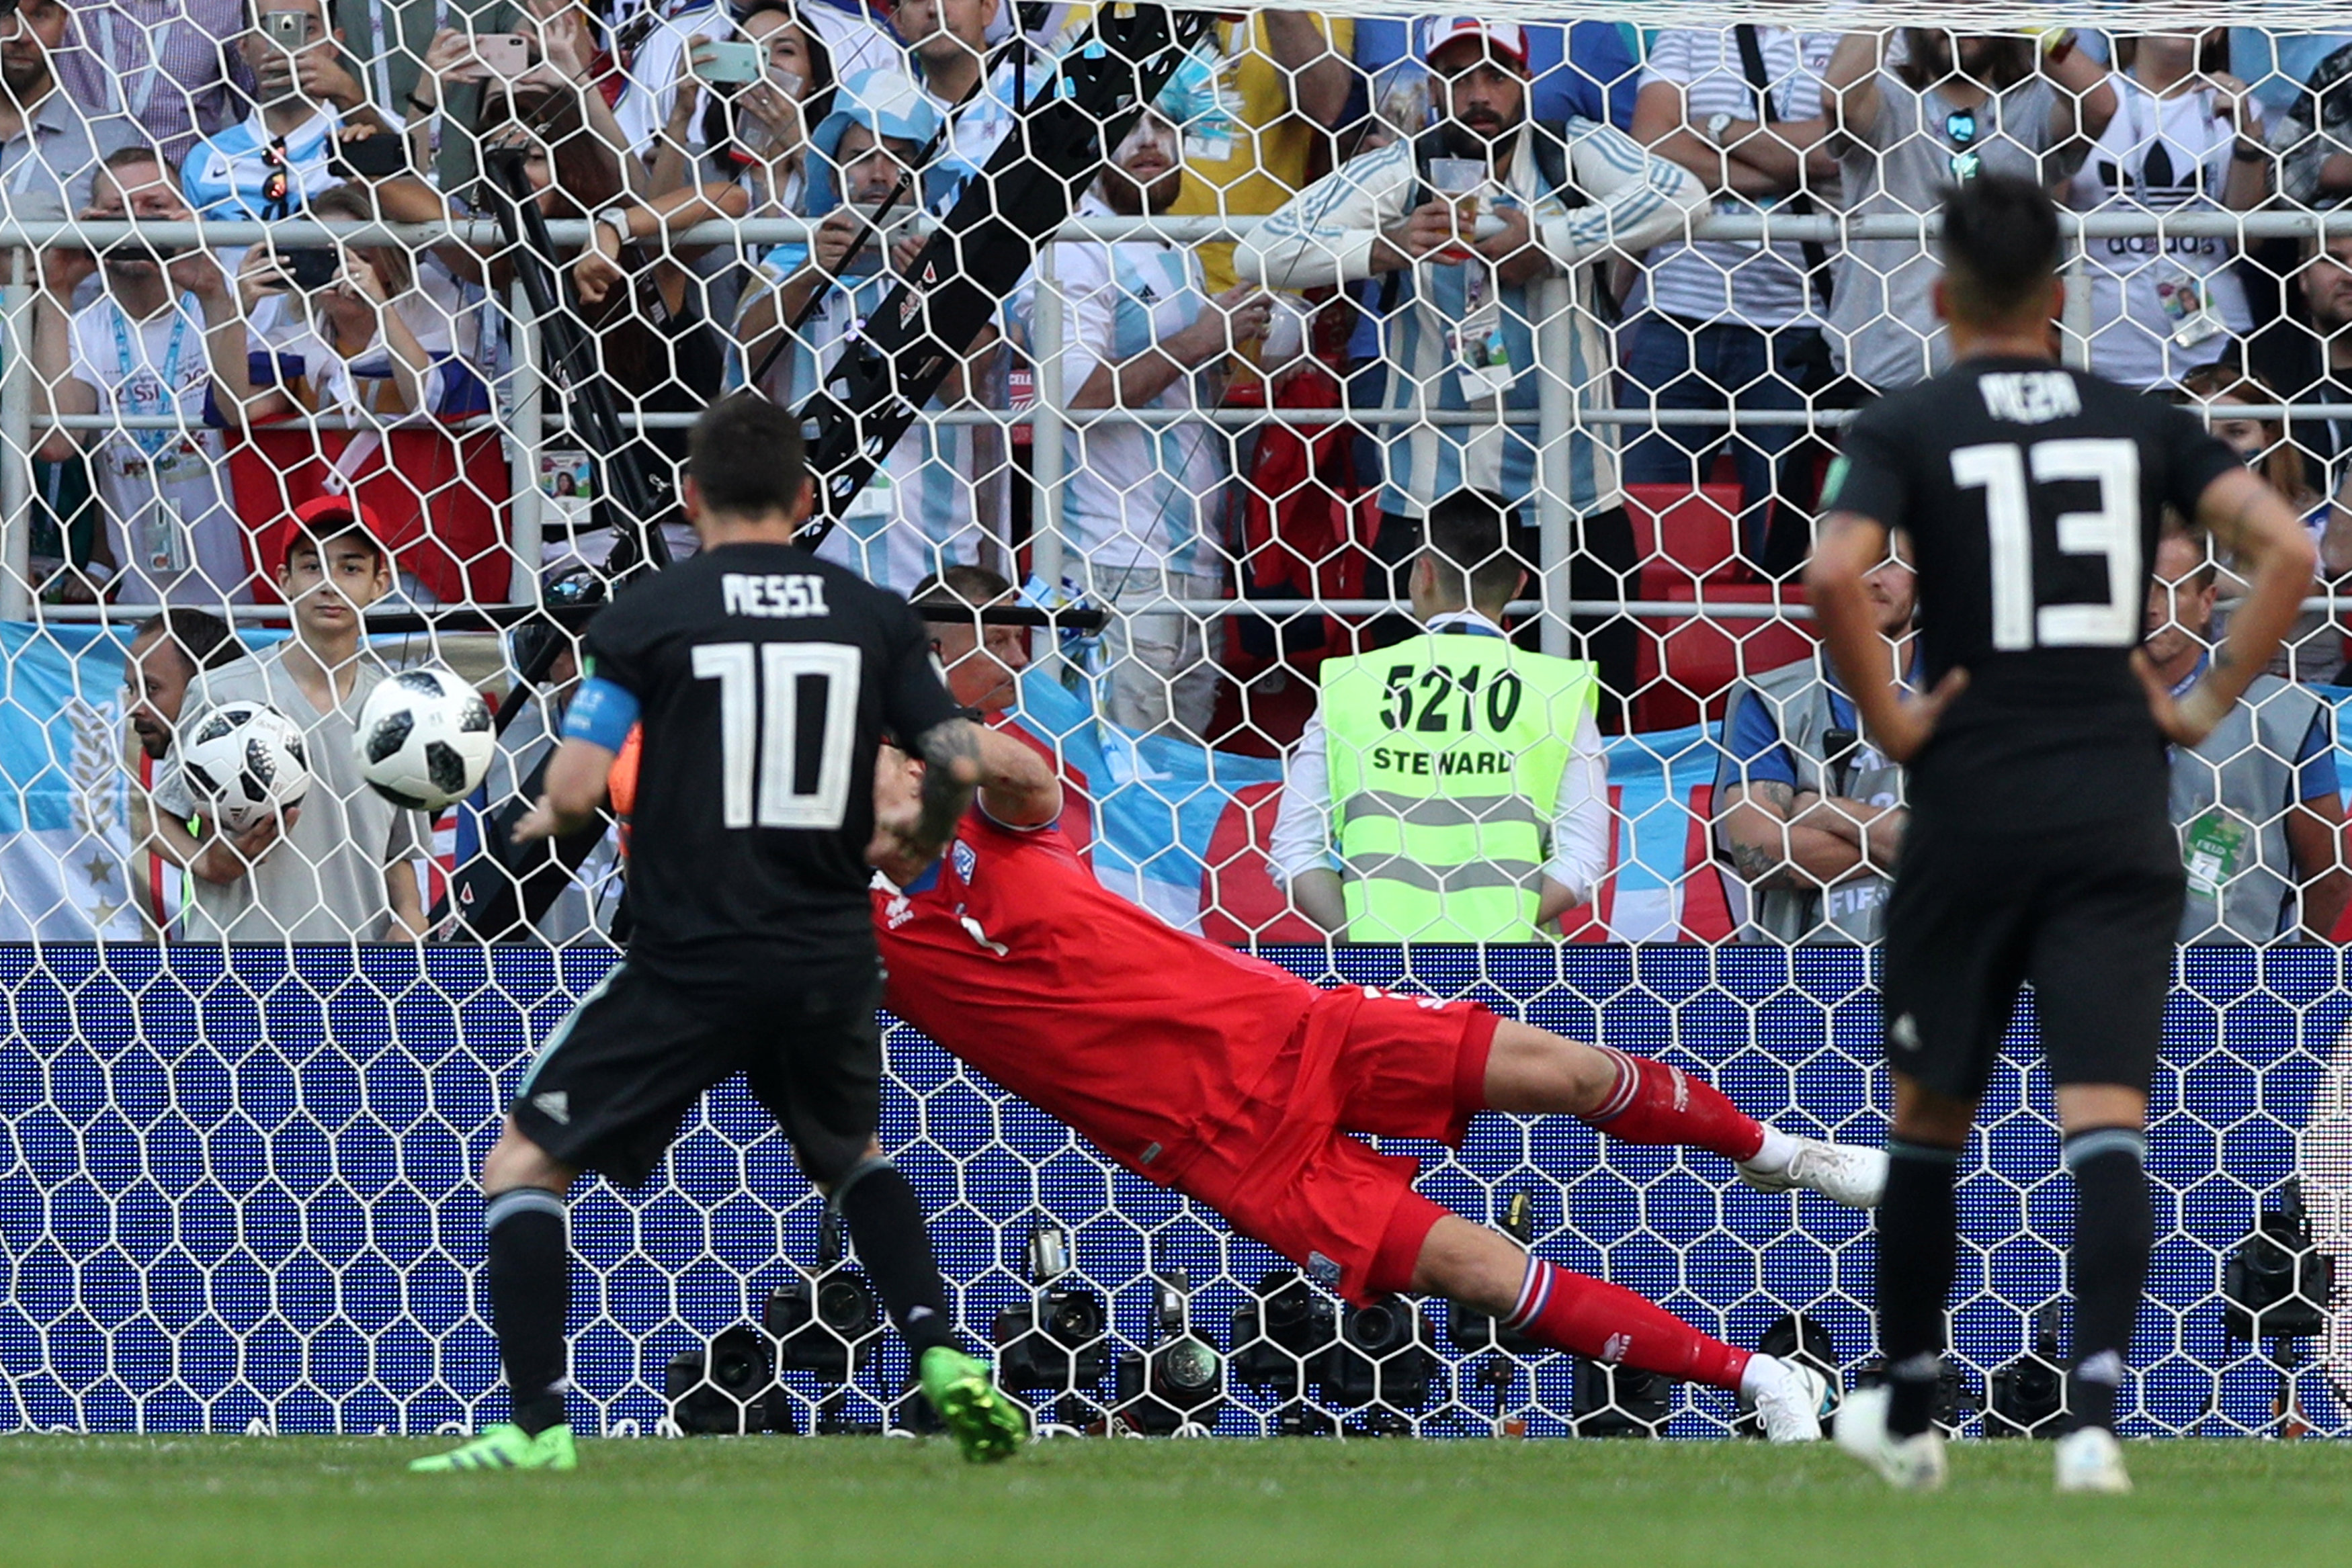  Iceland keeper Hannes Por Halldorsson saves Lionel Messi's penalty at the match in Moscow. Photo...